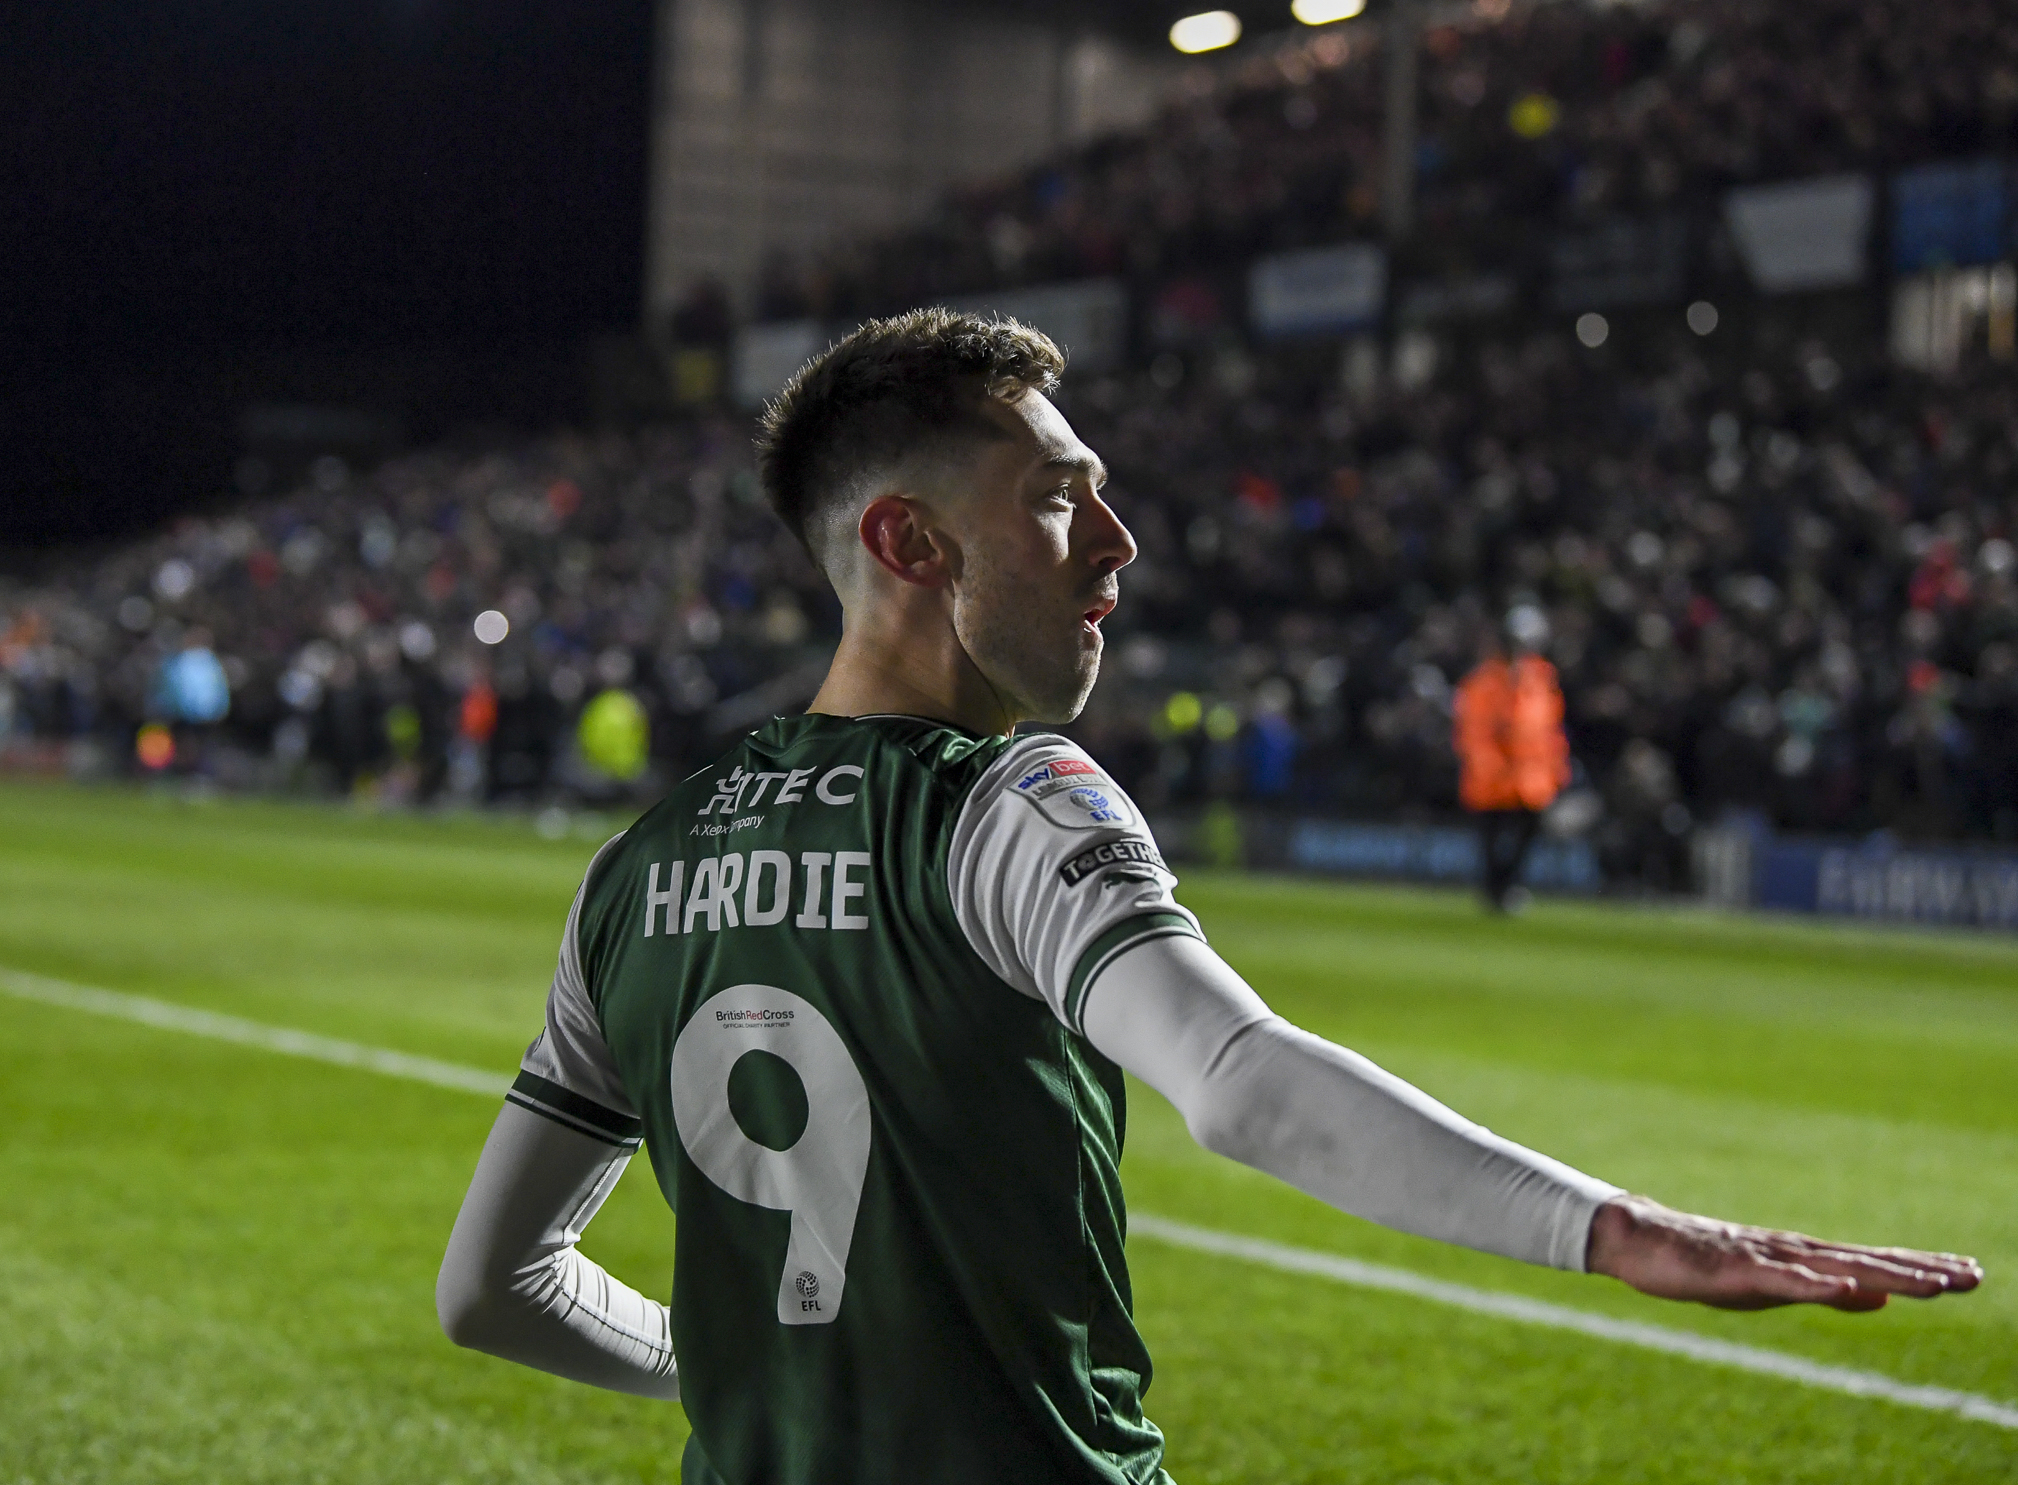 Ryan Hardie celebrates scoring against Derby County at Home Park